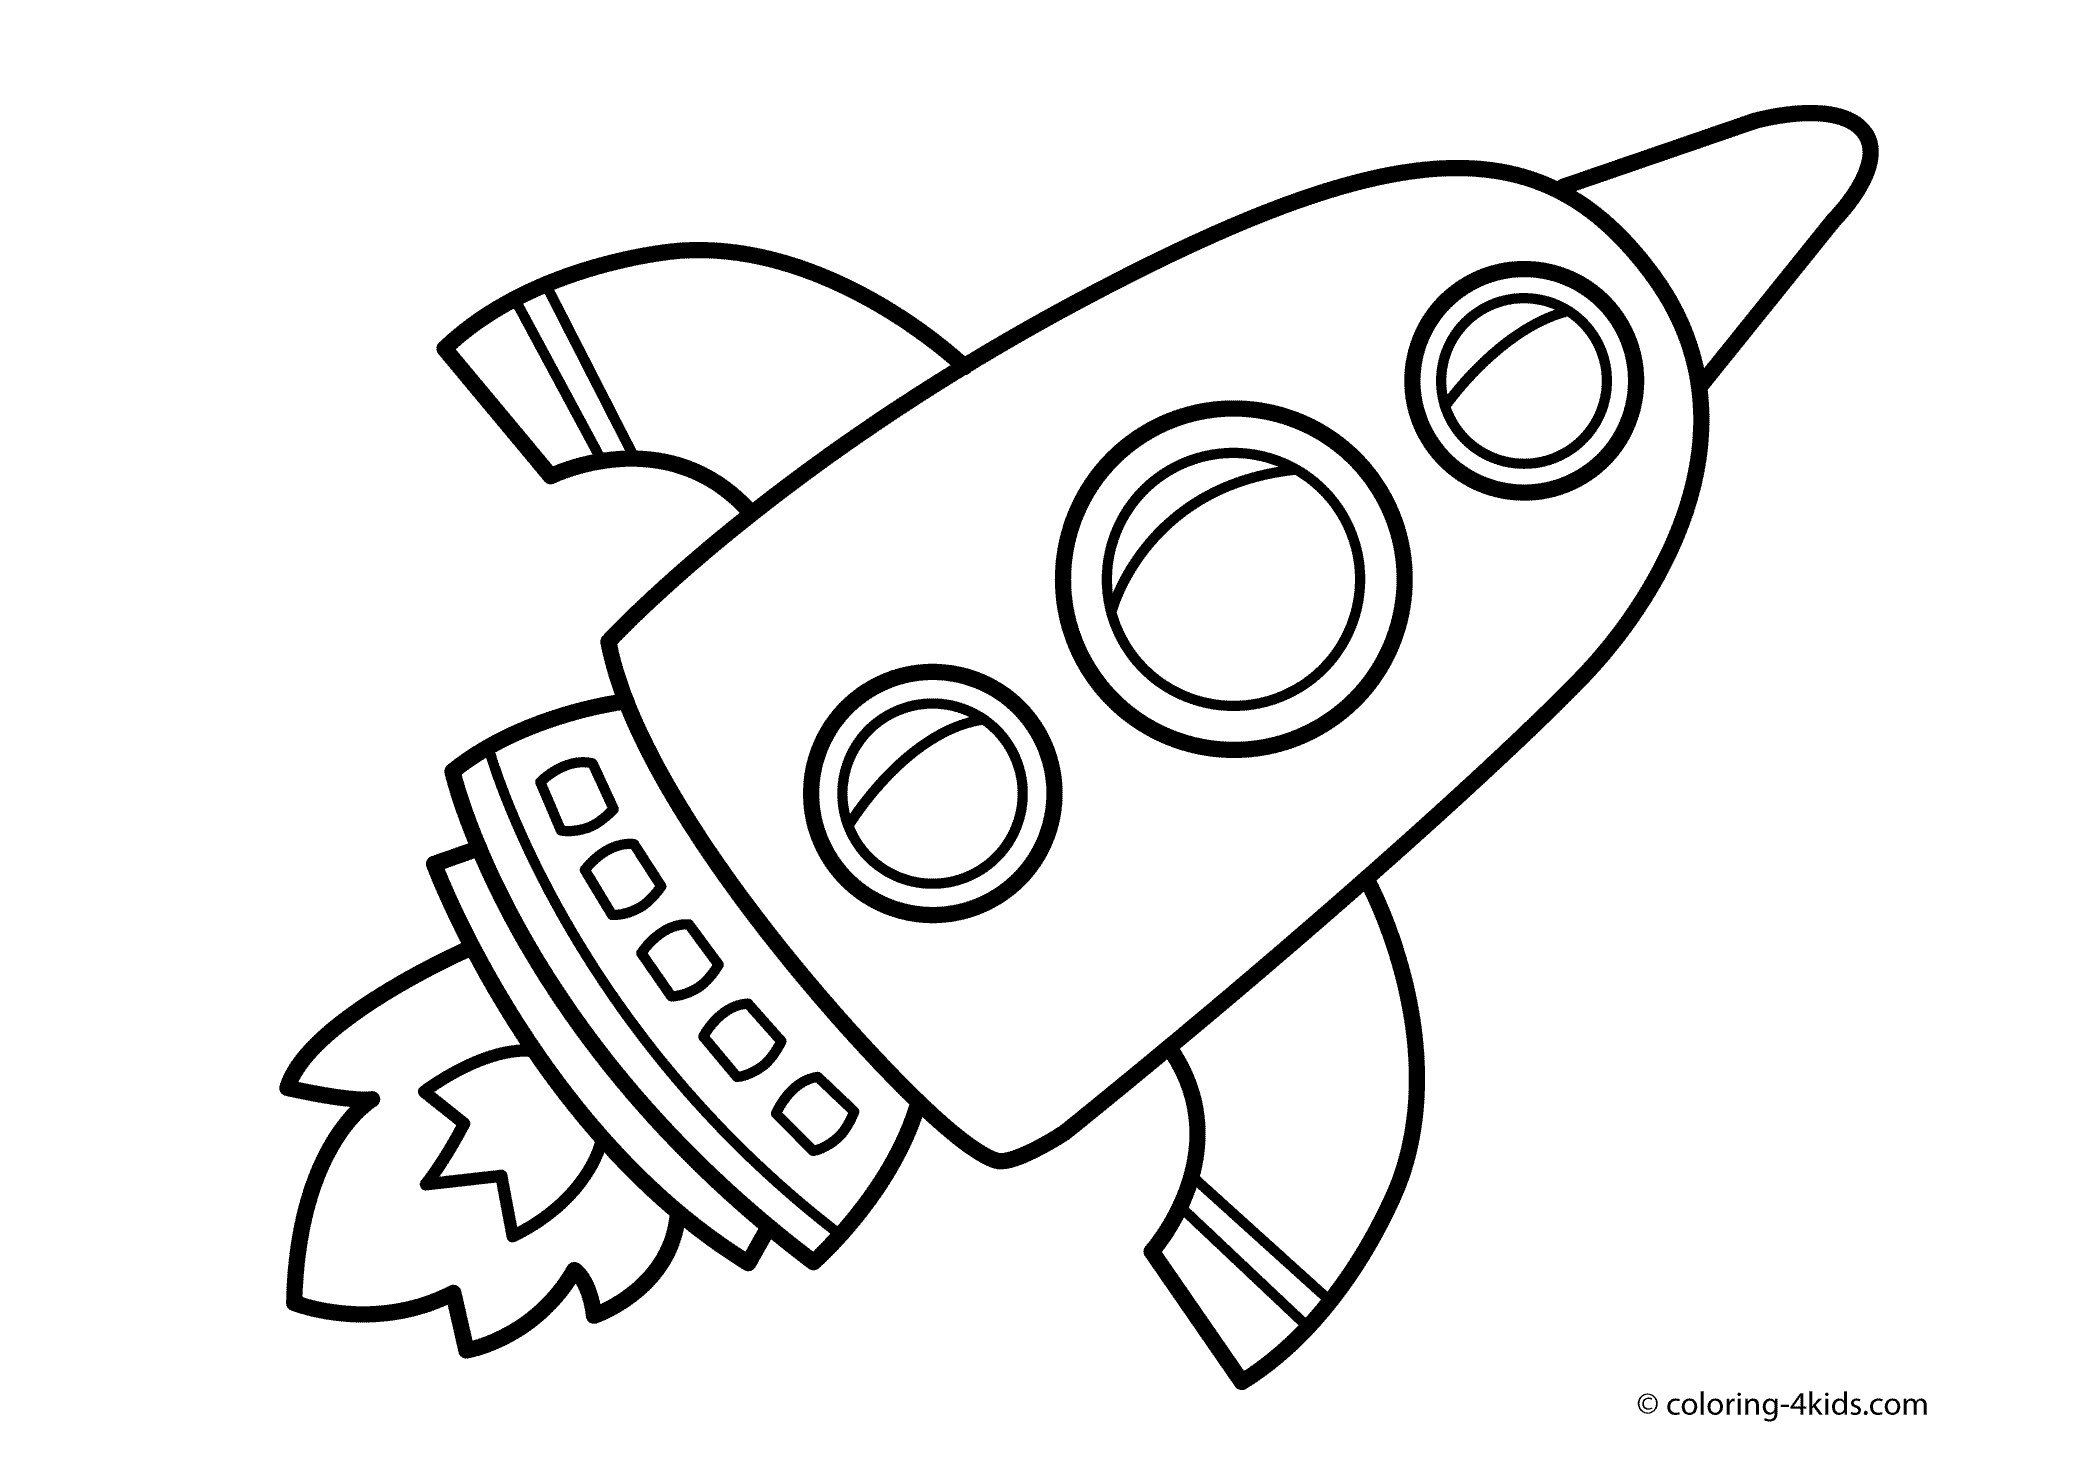 Drawings Rocket Transportation – Printable coloring pages